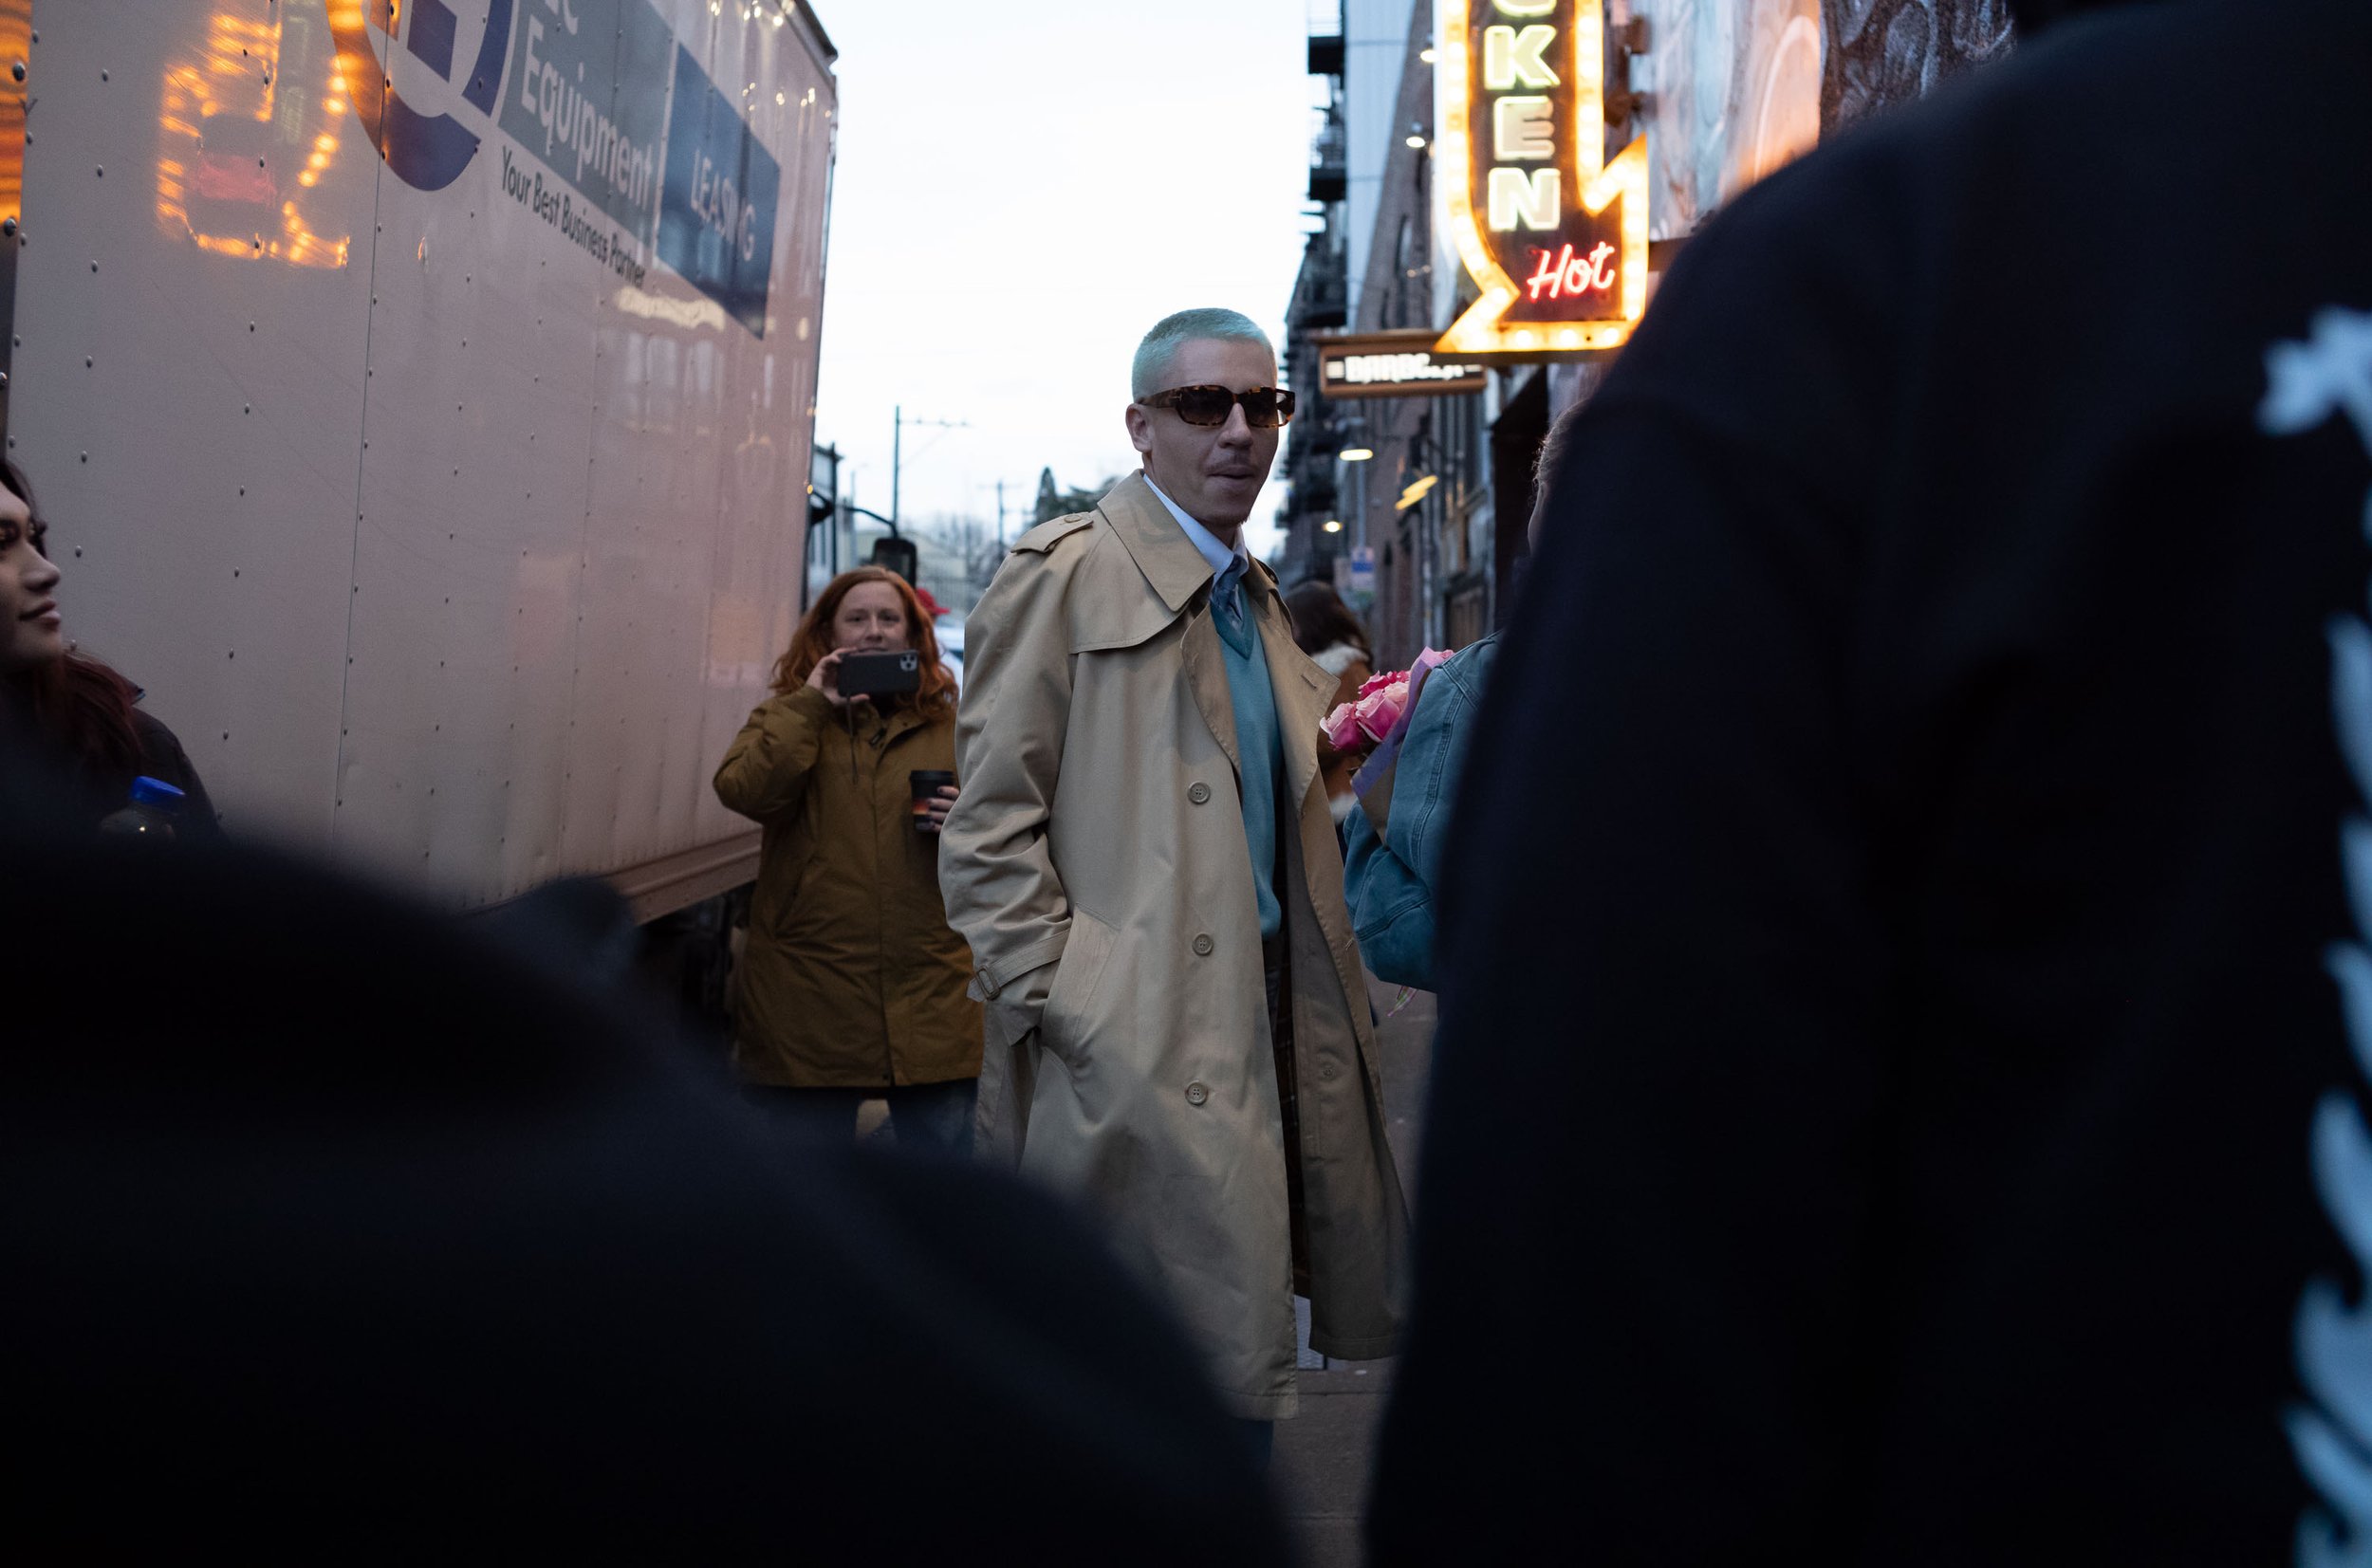  The musician Macklemore greets fans outside Neumos in Seattle, Washington, USA on March 6, 2023. 